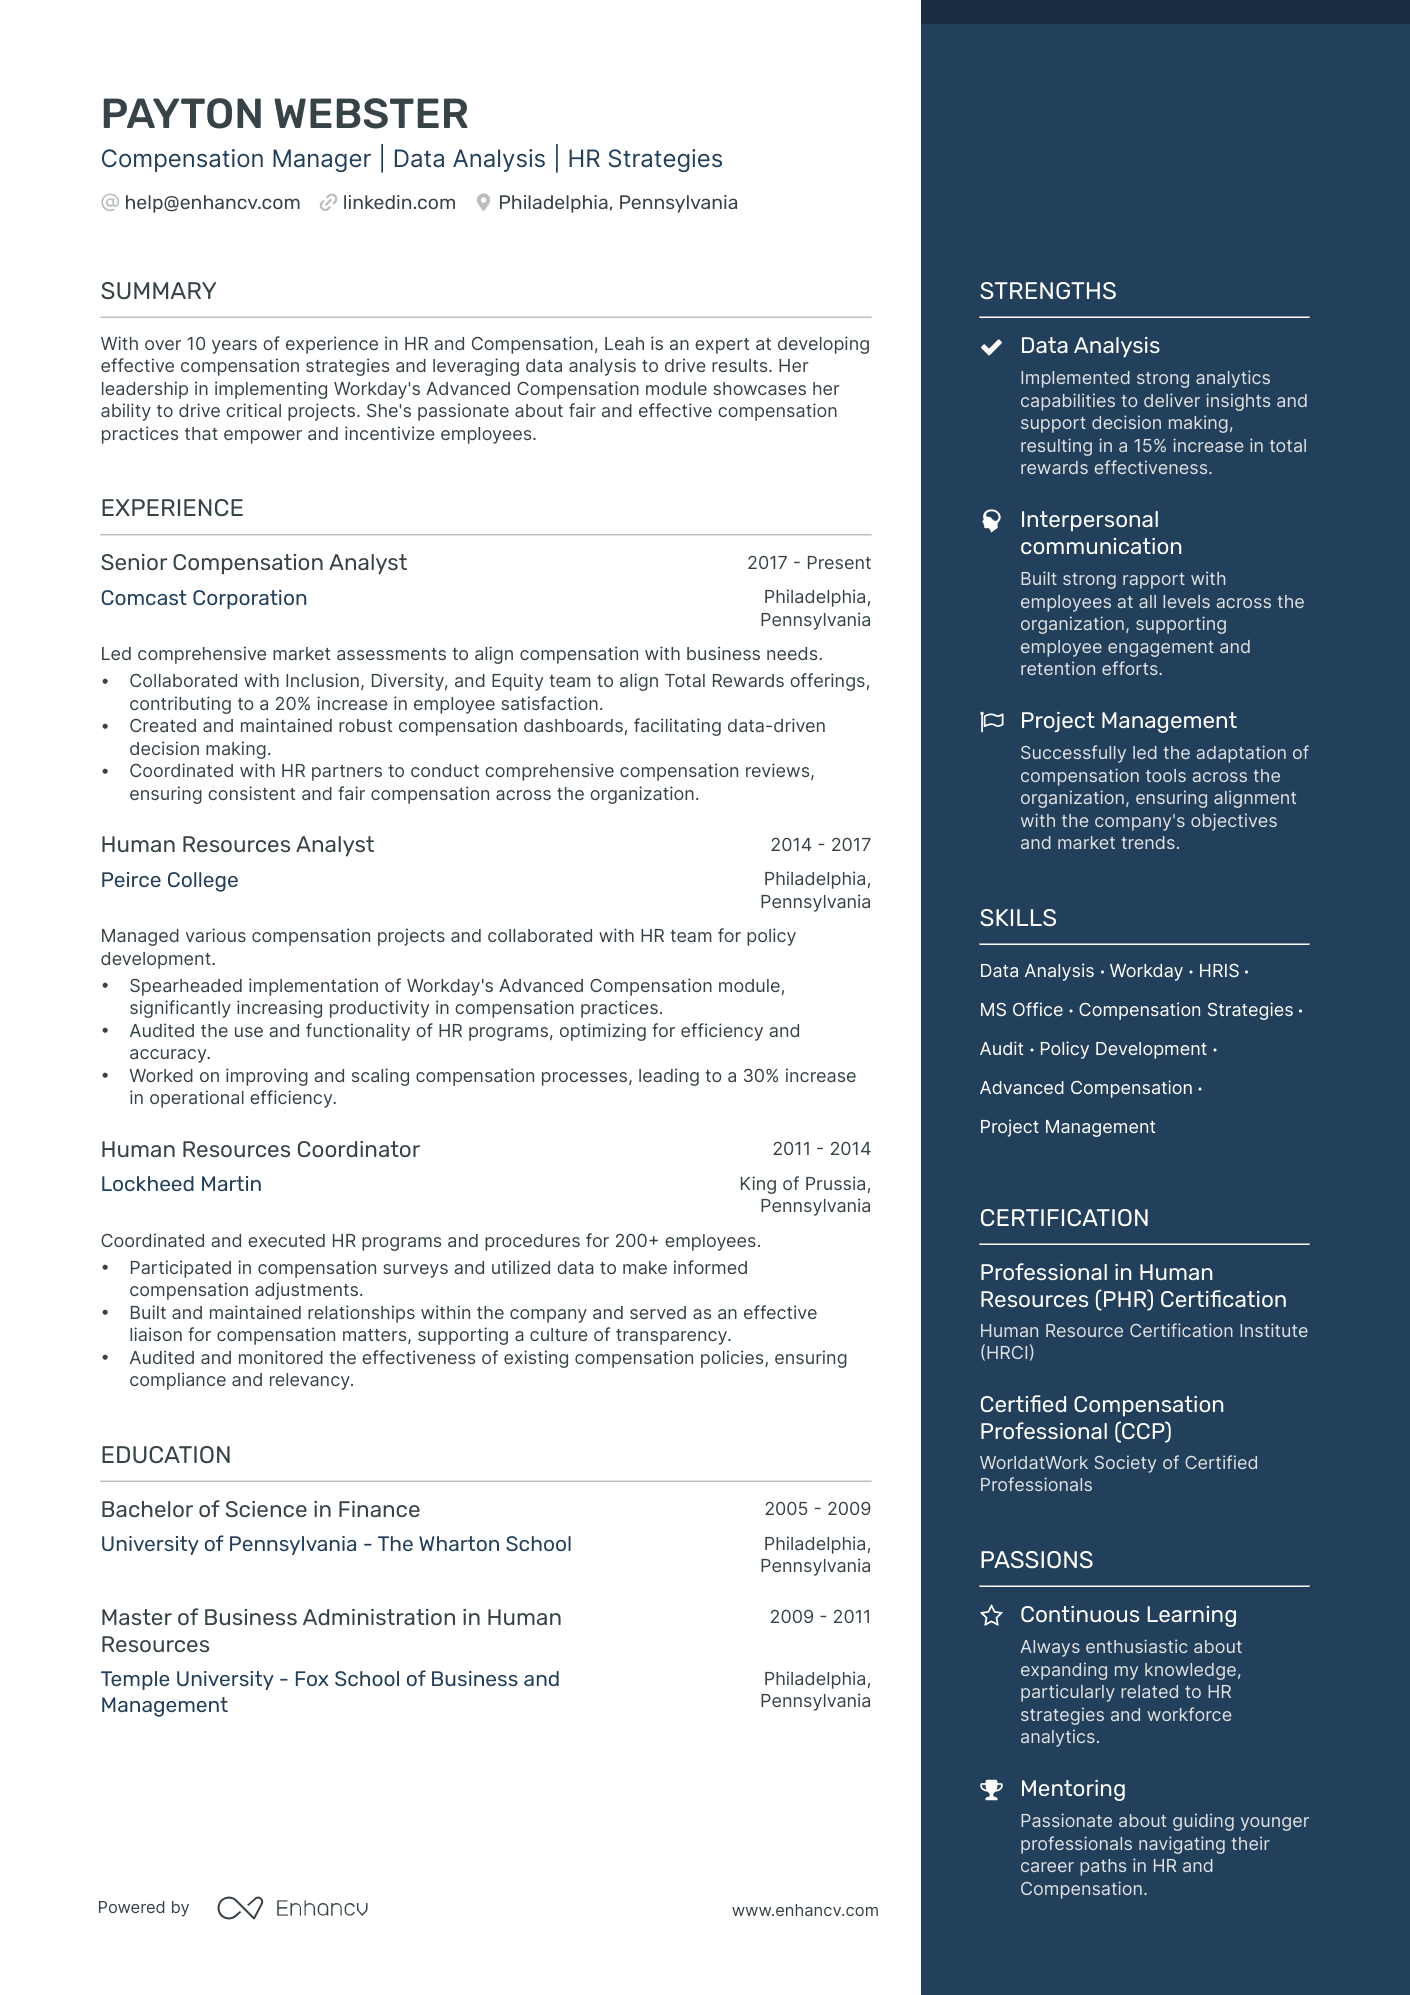 Compensation Manager resume example